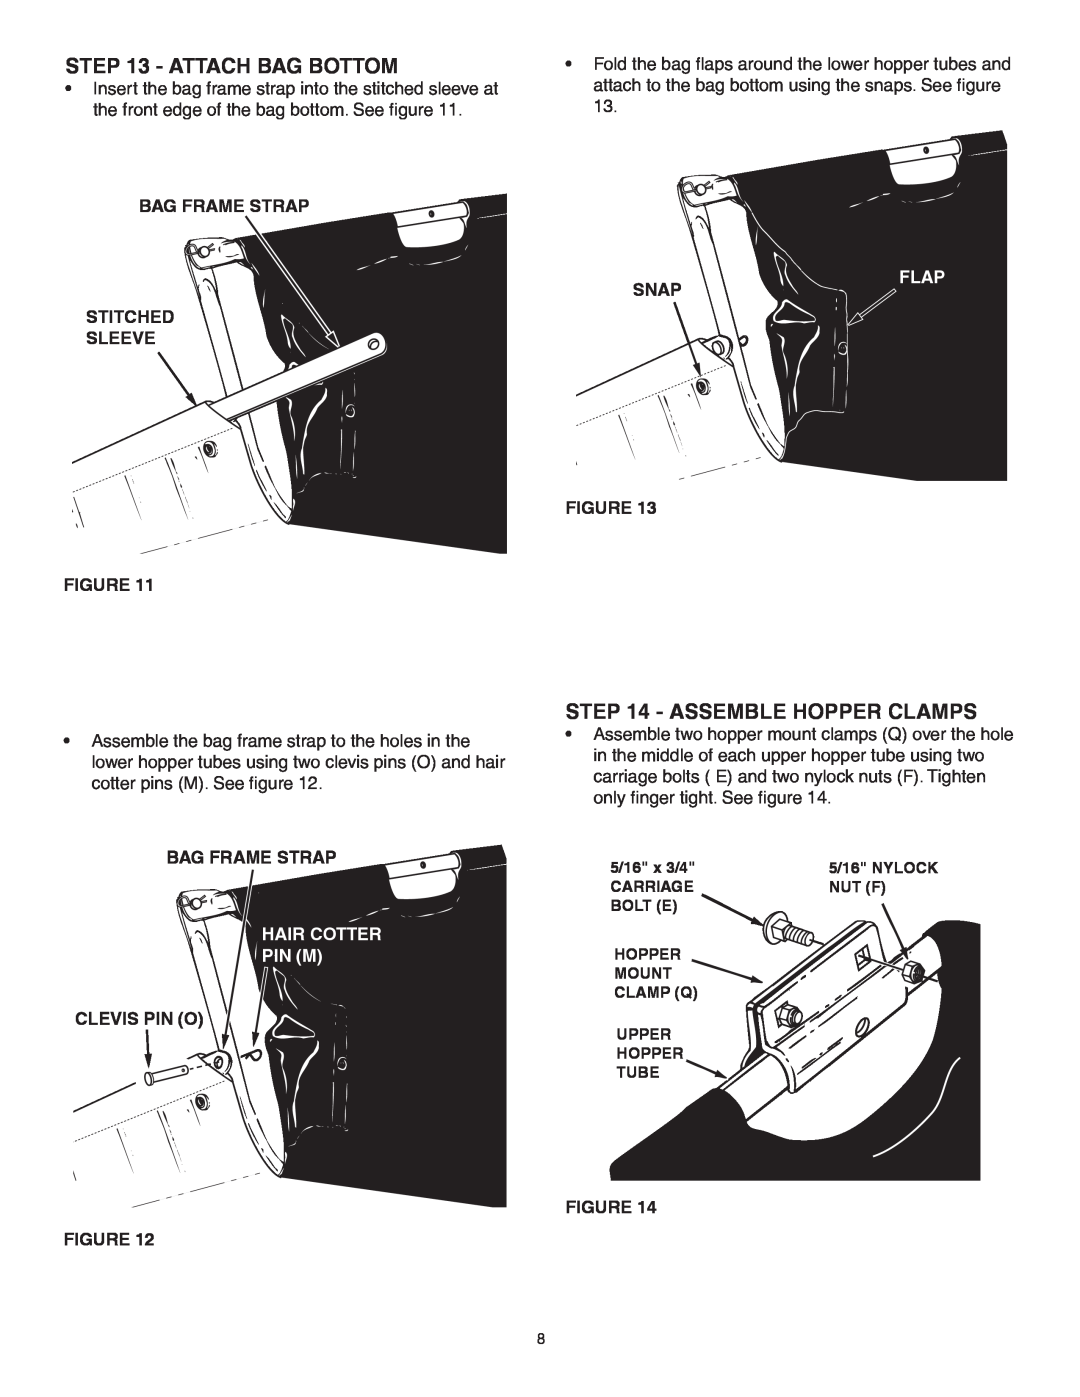 Craftsman 486.24222 owner manual Attach Bag Bottom, Assemble Hopper Clamps, Hair Cotter Pin M, Flap 